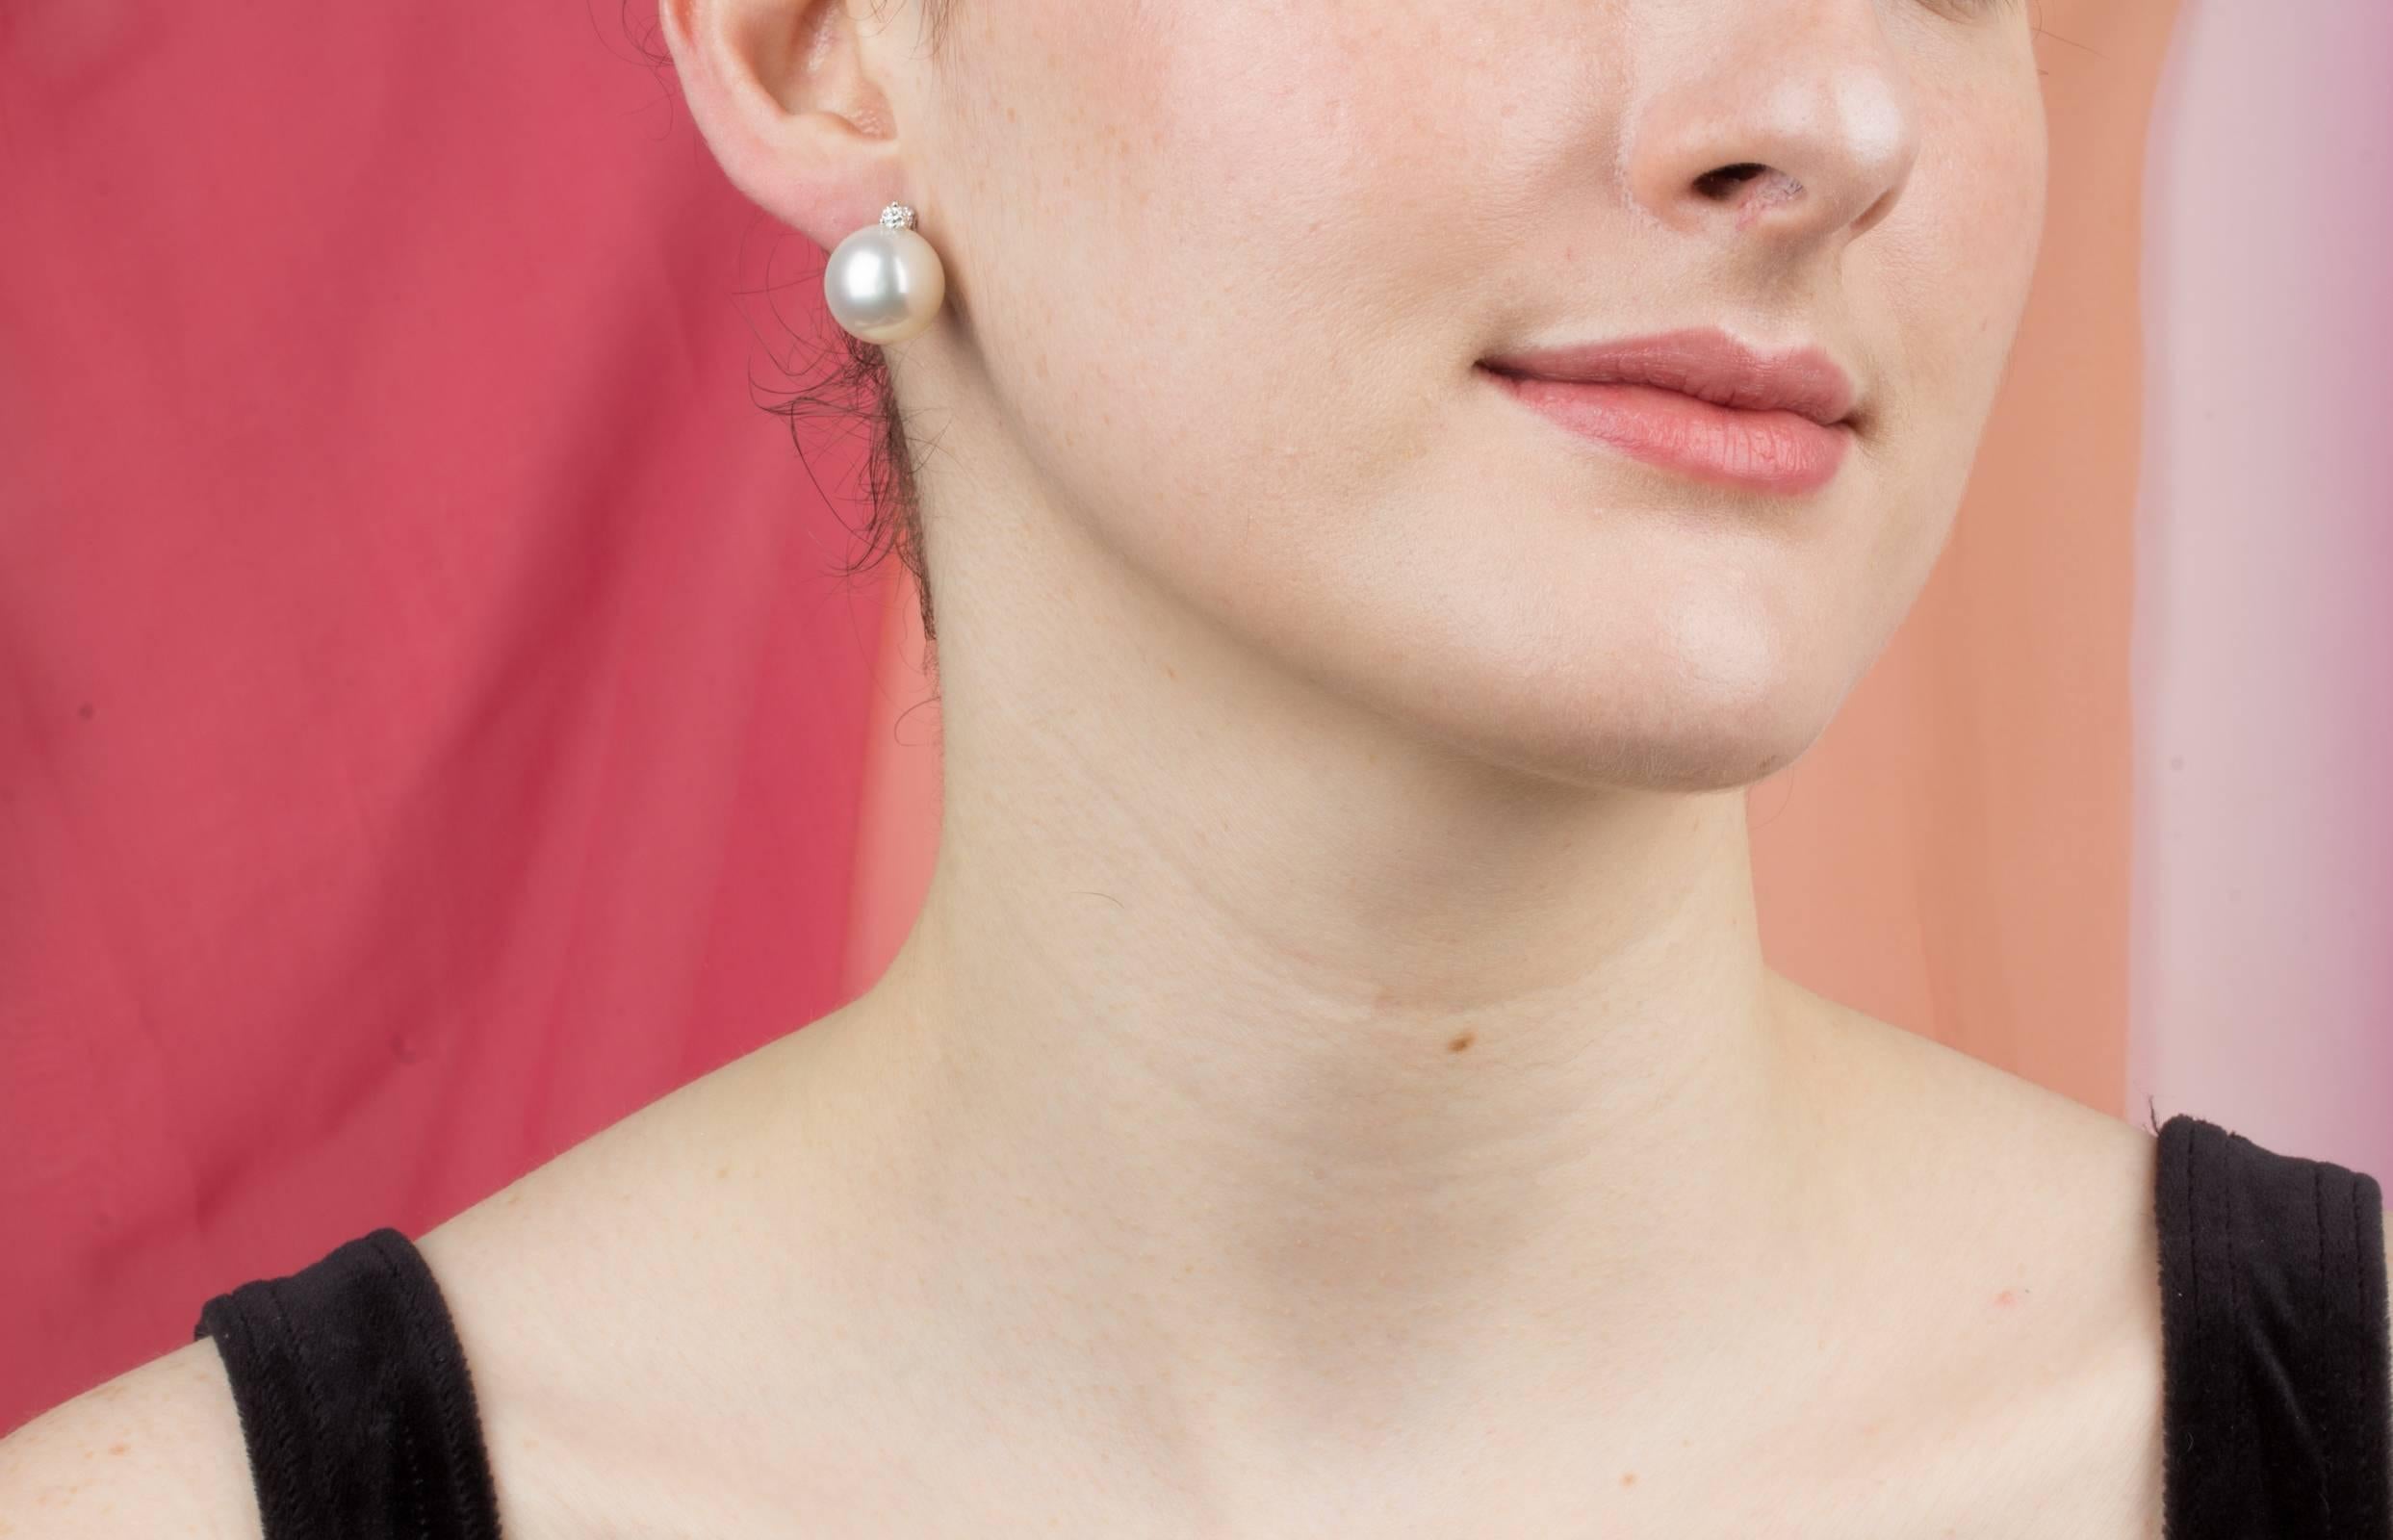 The South Sea pearl earrings feature two 14/14.5mm diameter pearls from the waters of Northwestern Australia. The design is complete with 4 diamonds (0.26 carats).
All of our pearls are untreated: their natural color and high luster have not been